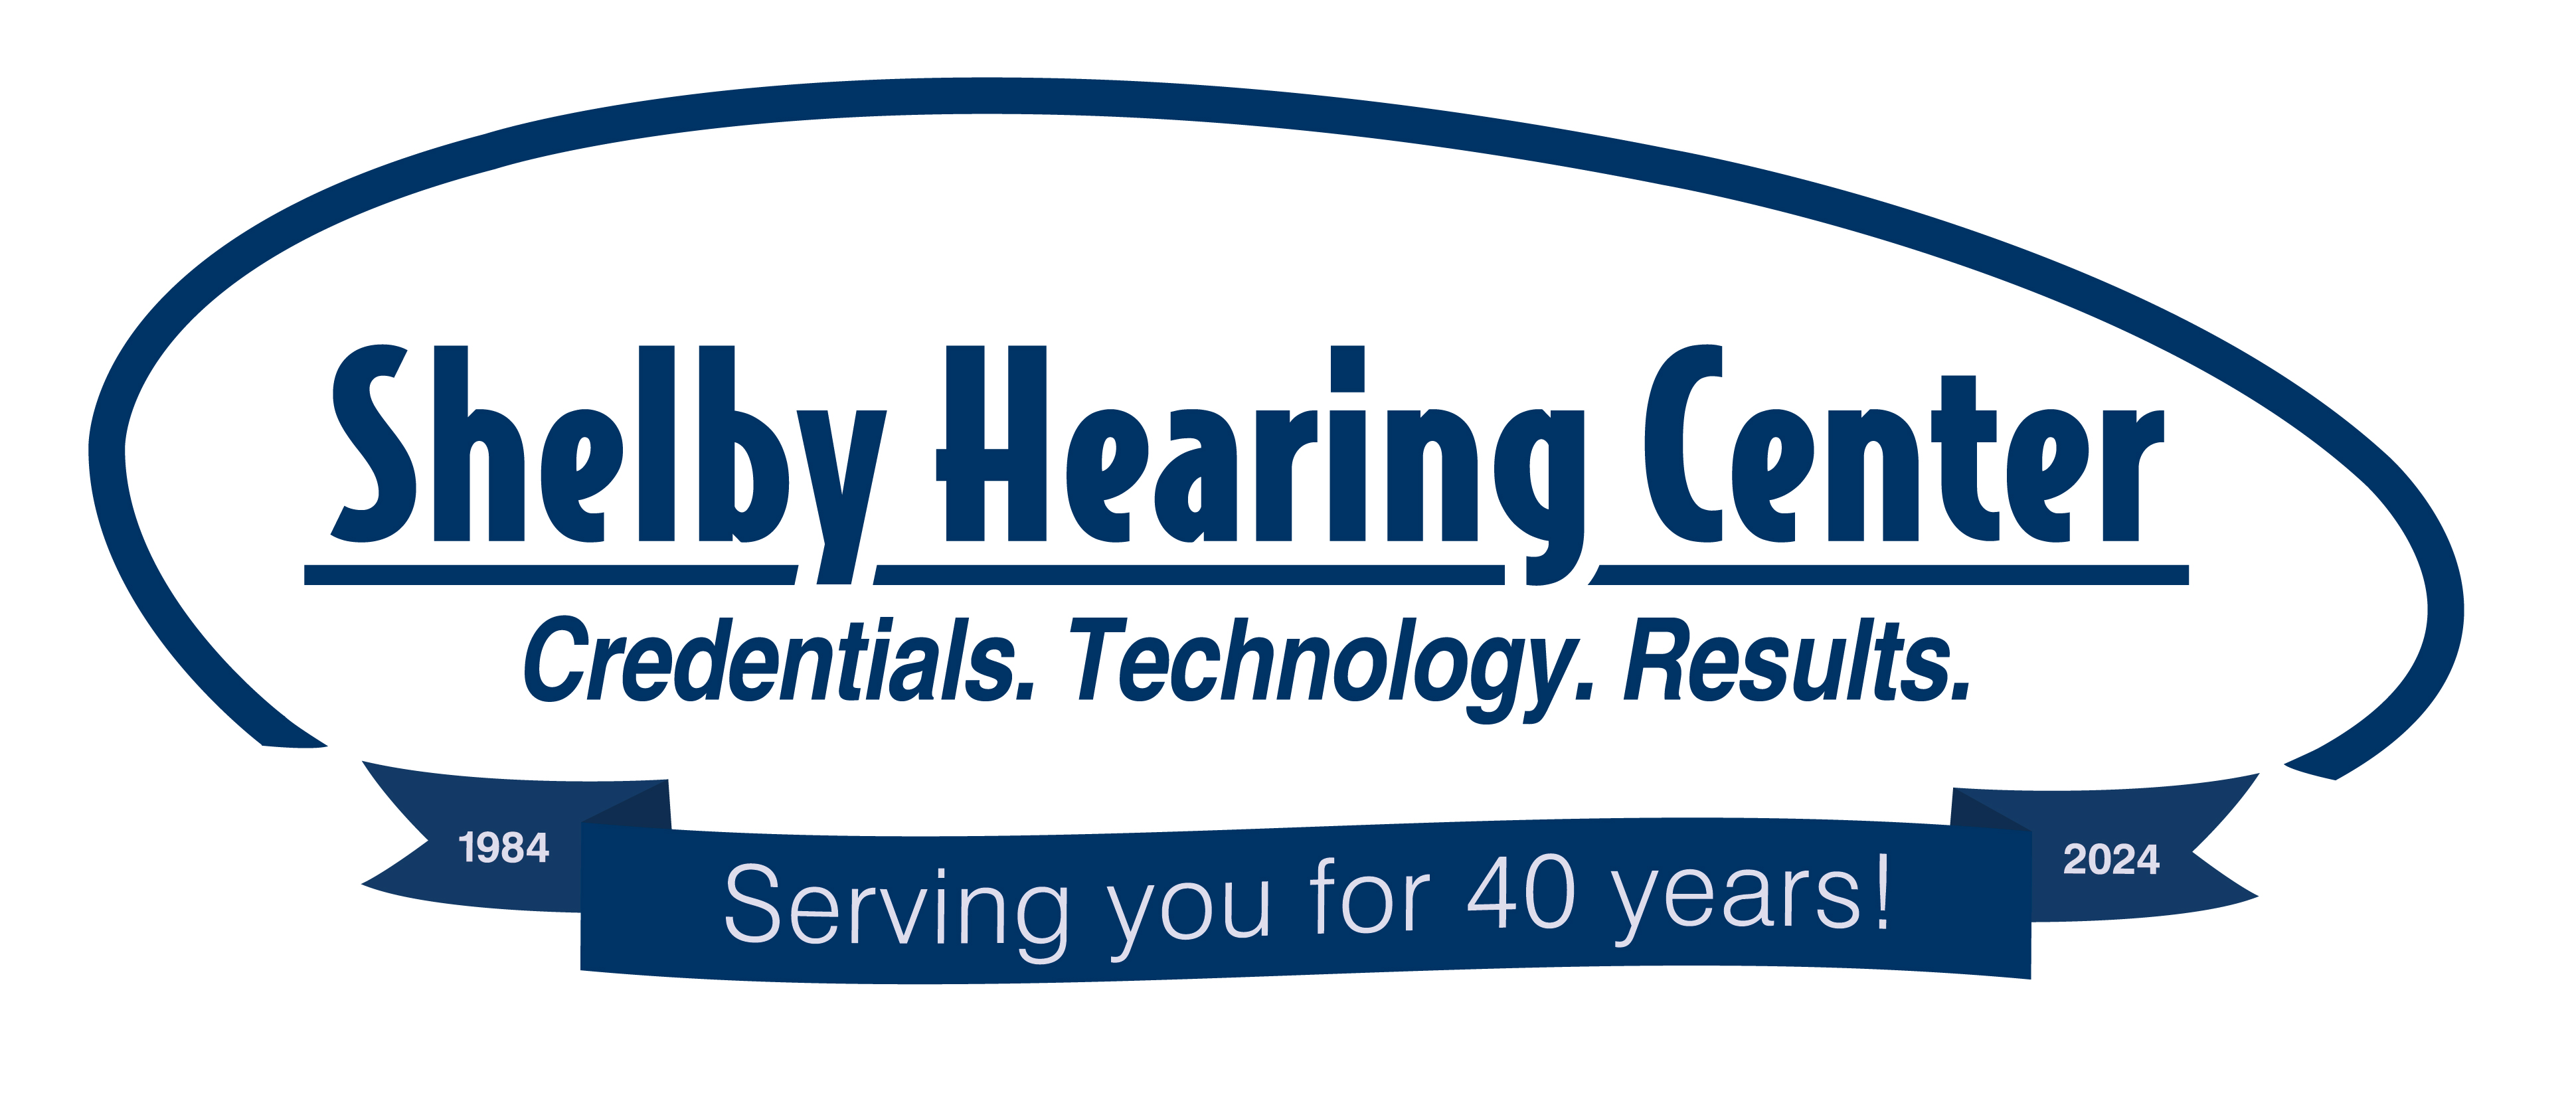 Shelby Hearing Center